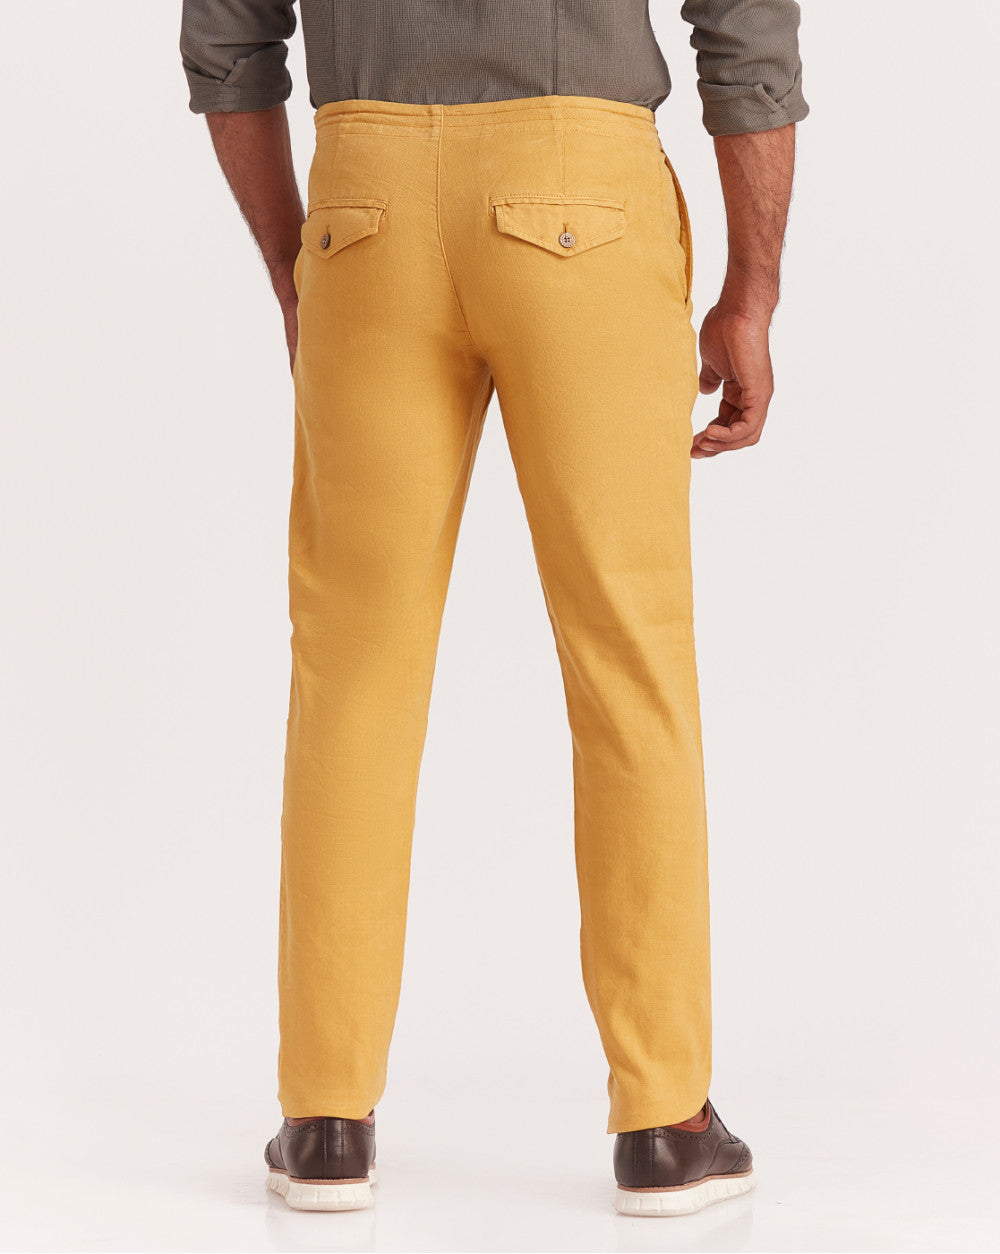 Tapered Fit Lounge Style Joggers - Golden Yellow